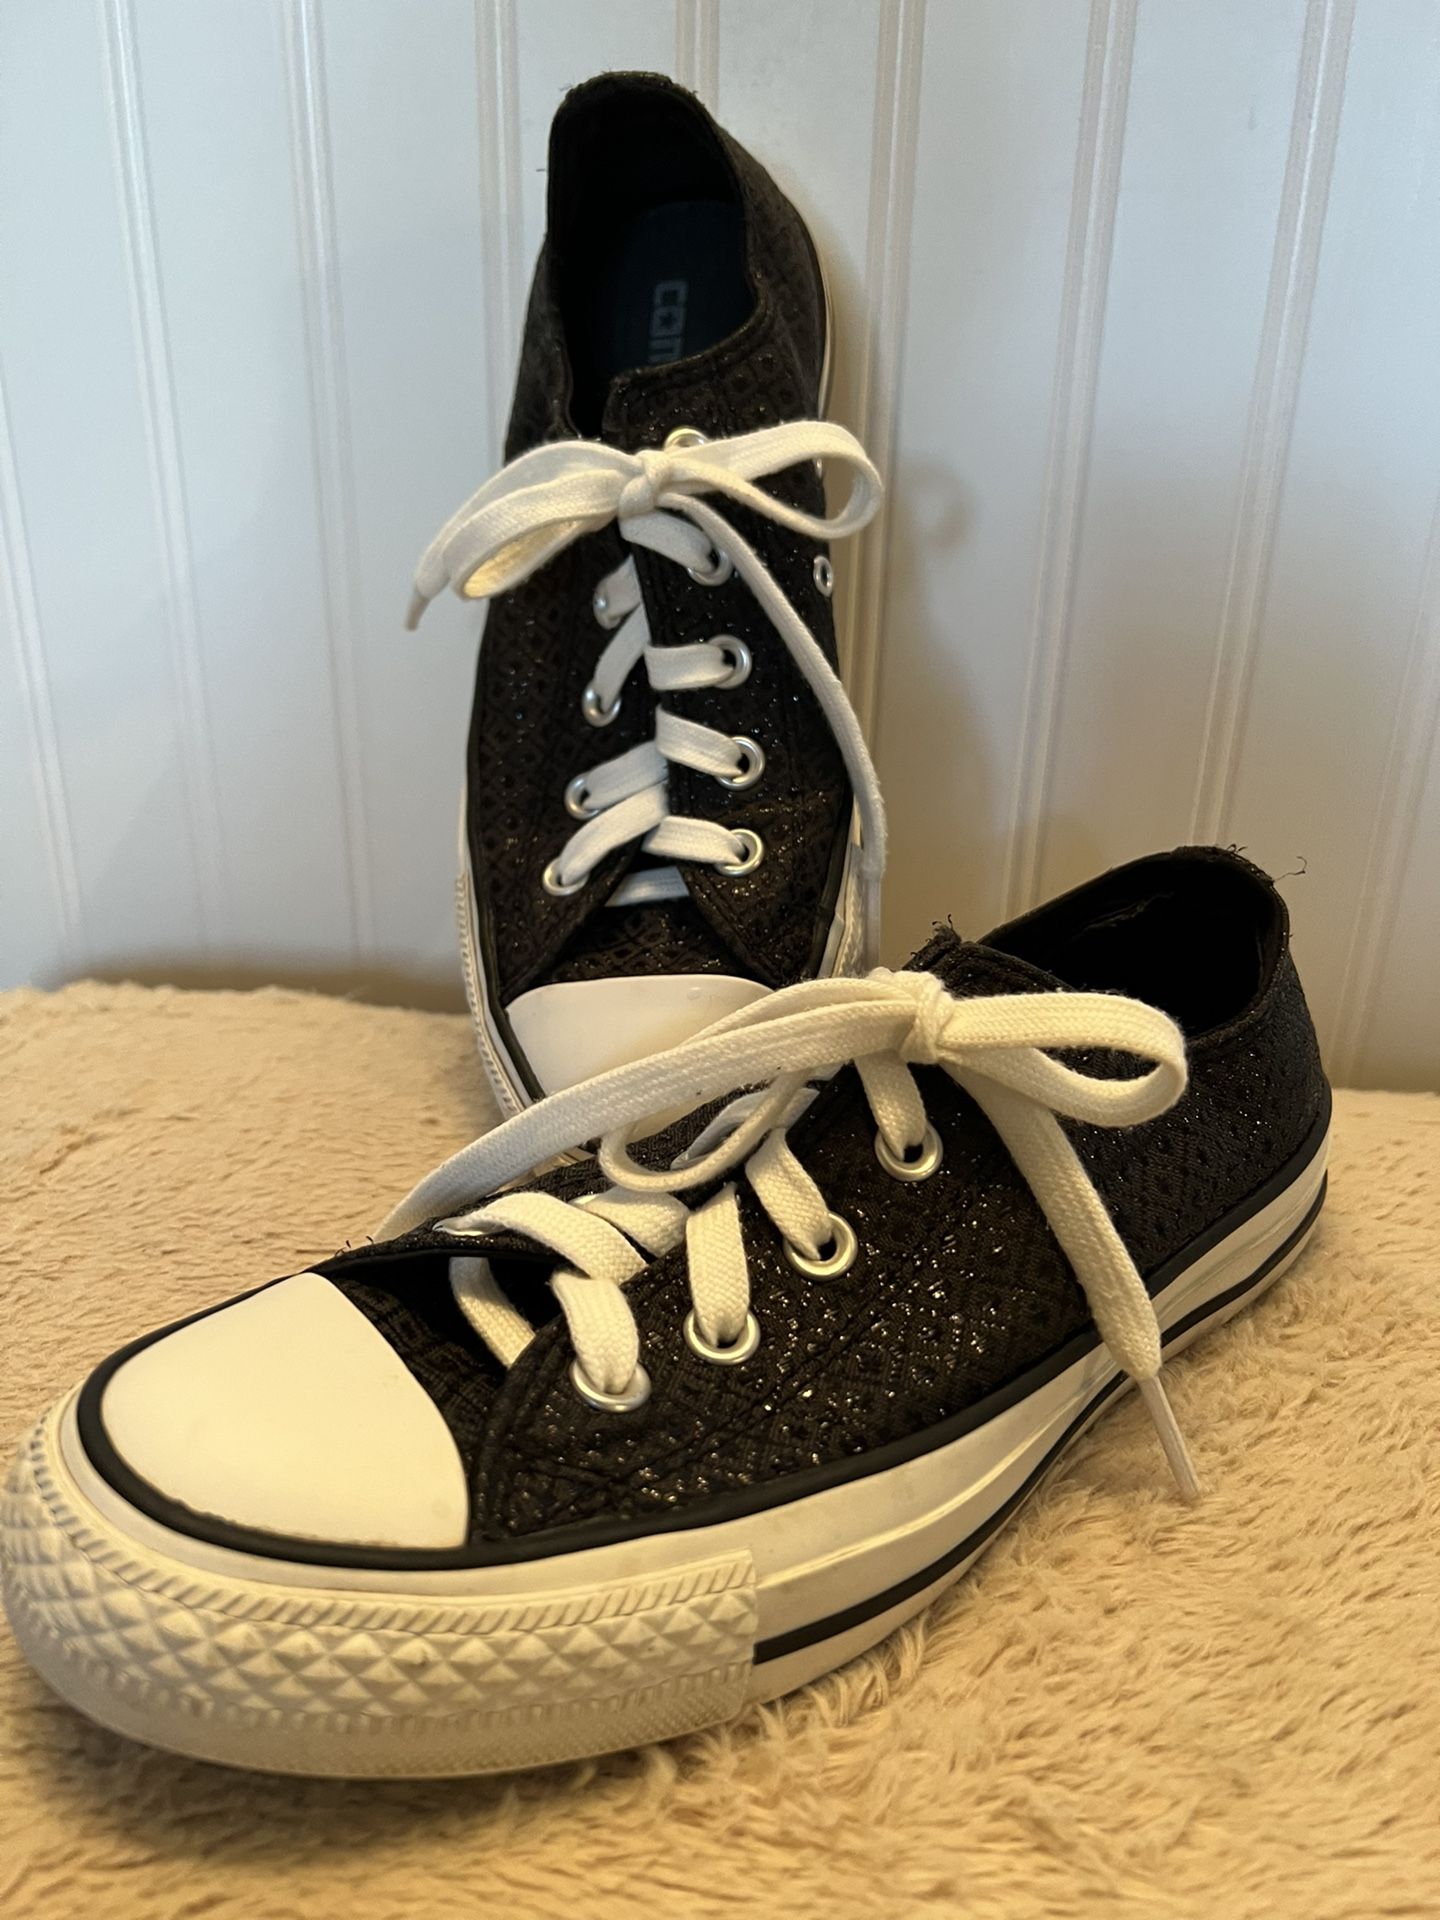 Converse All Star womens size 6